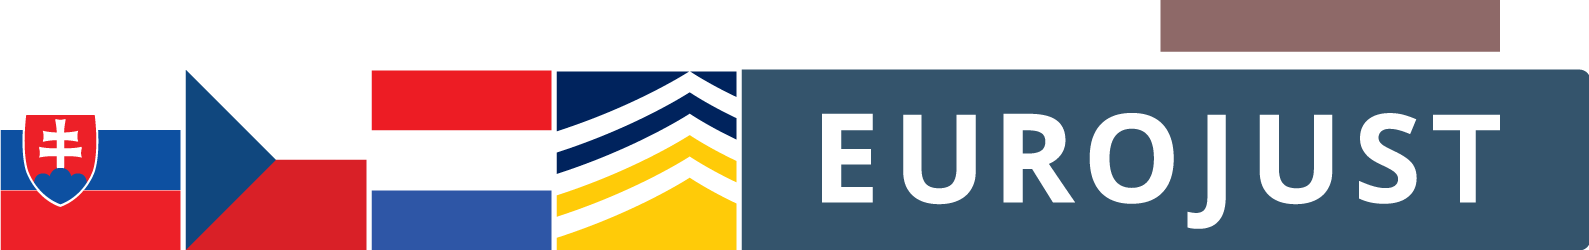 Flags of SK, CZ, NL, logos of Europol and Eurojust